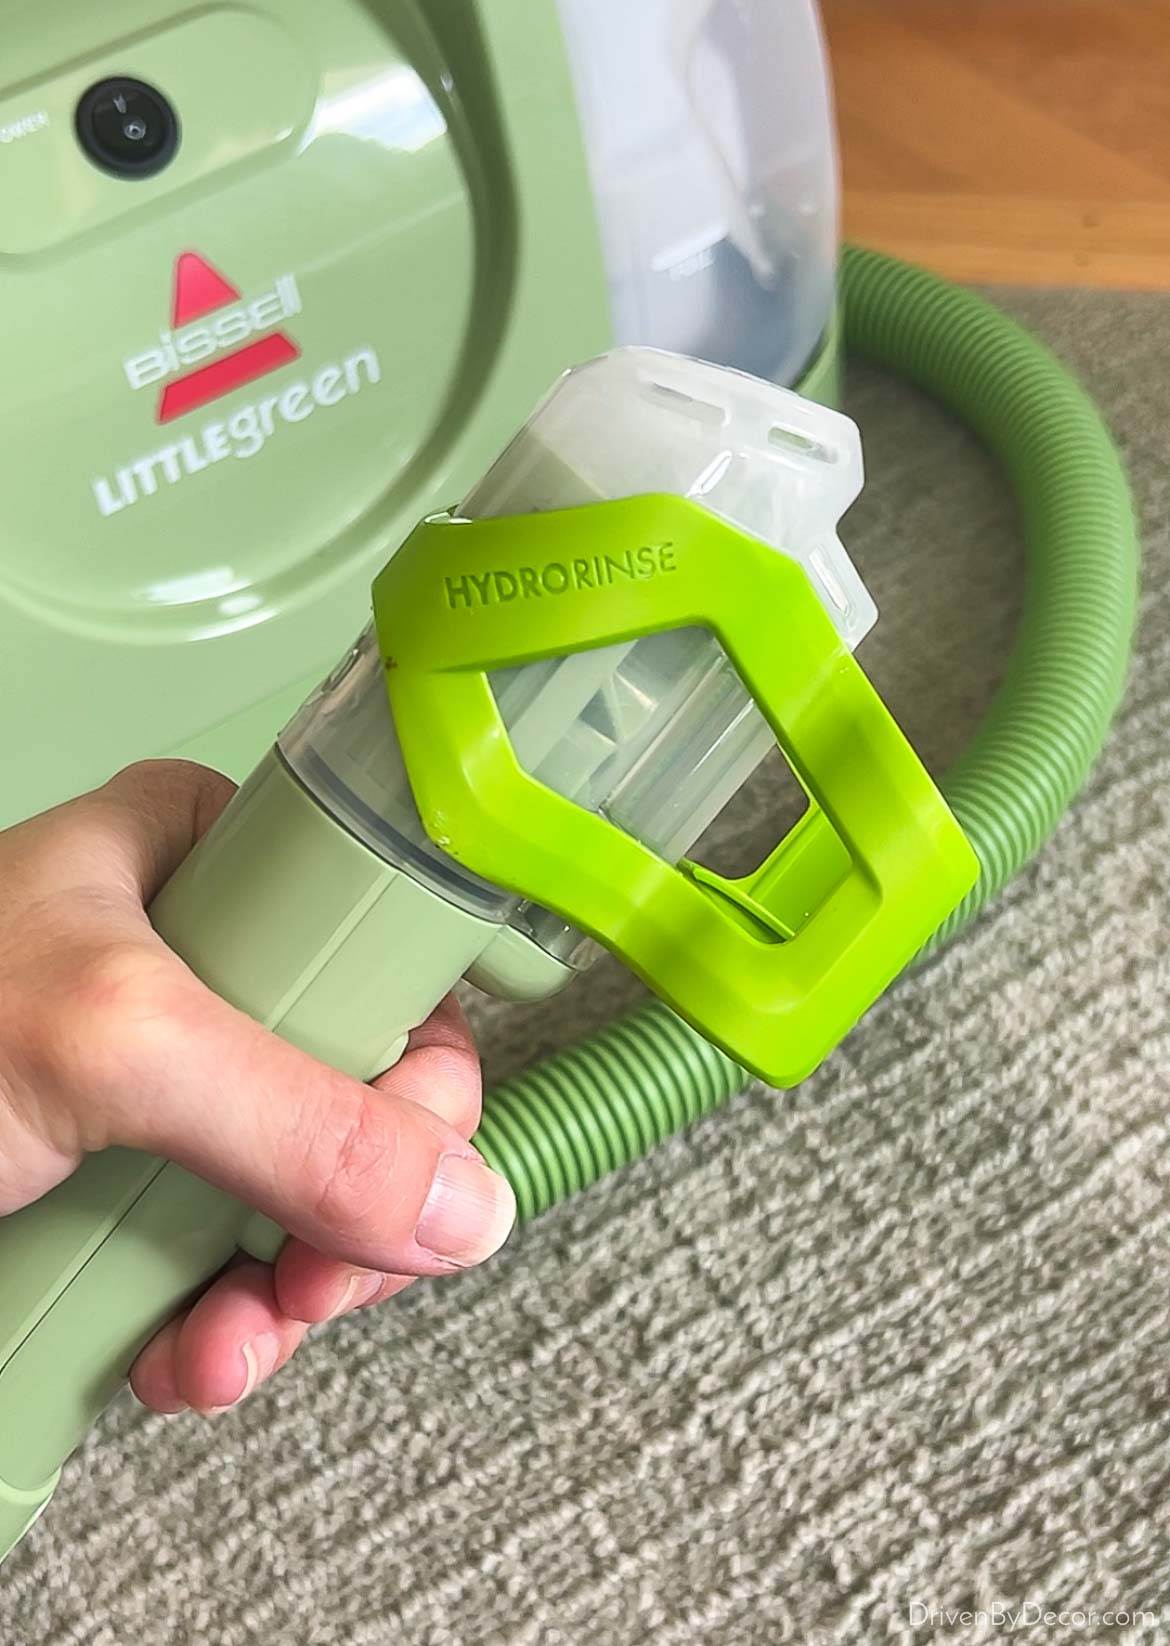 Love this hydrorinse attachment that cleans the hose of my Bissell carpet cleaner